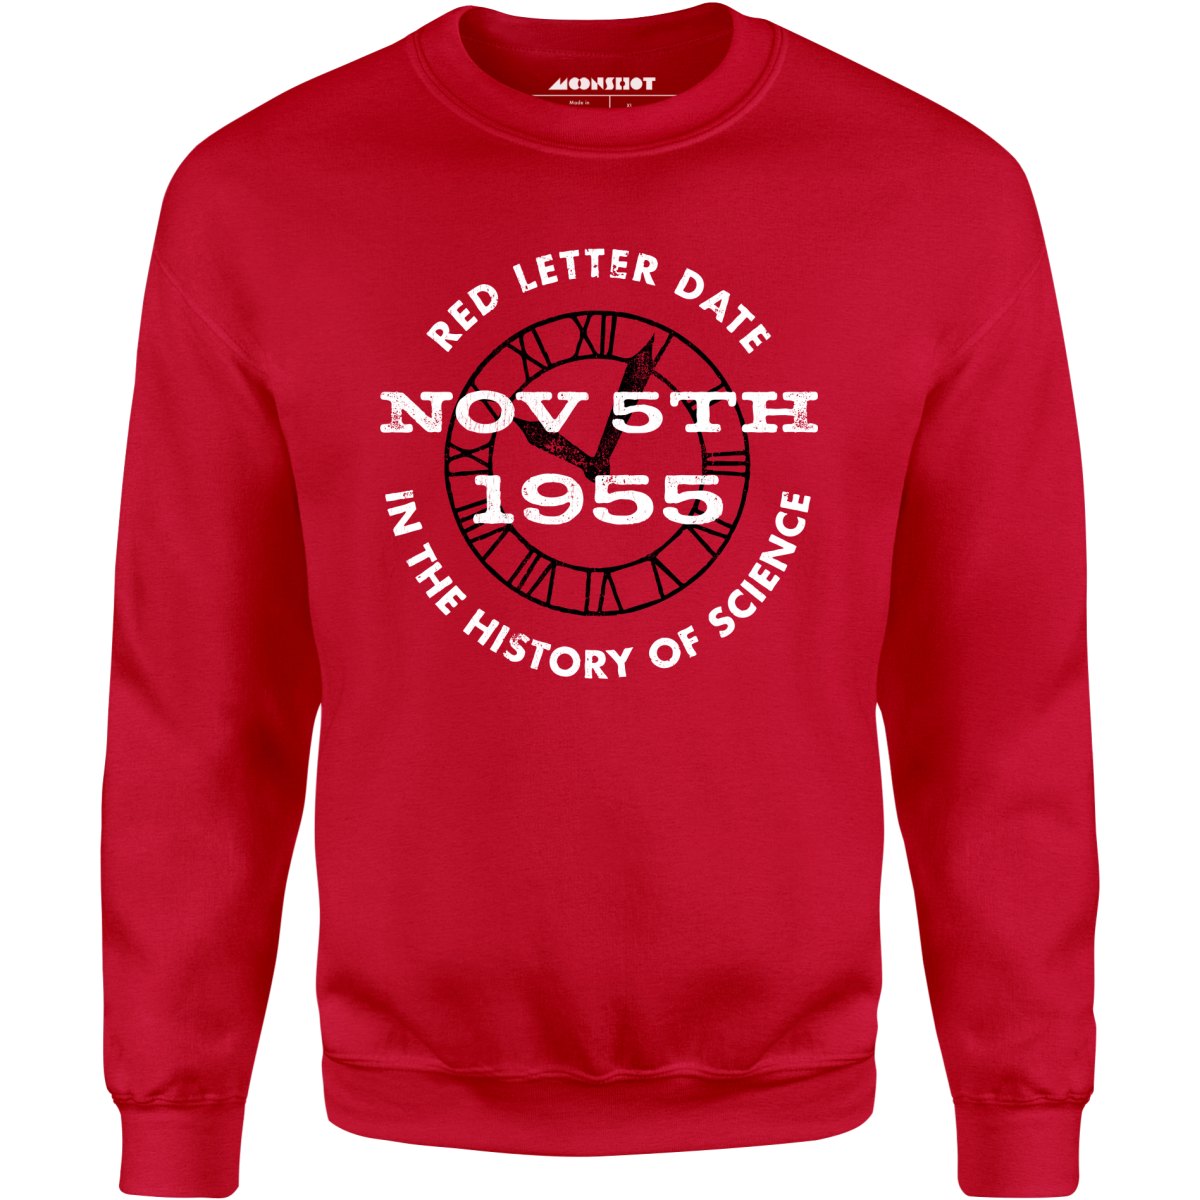 November 5th 1955 - Red Letter Date in the History of Science - Unisex Sweatshirt